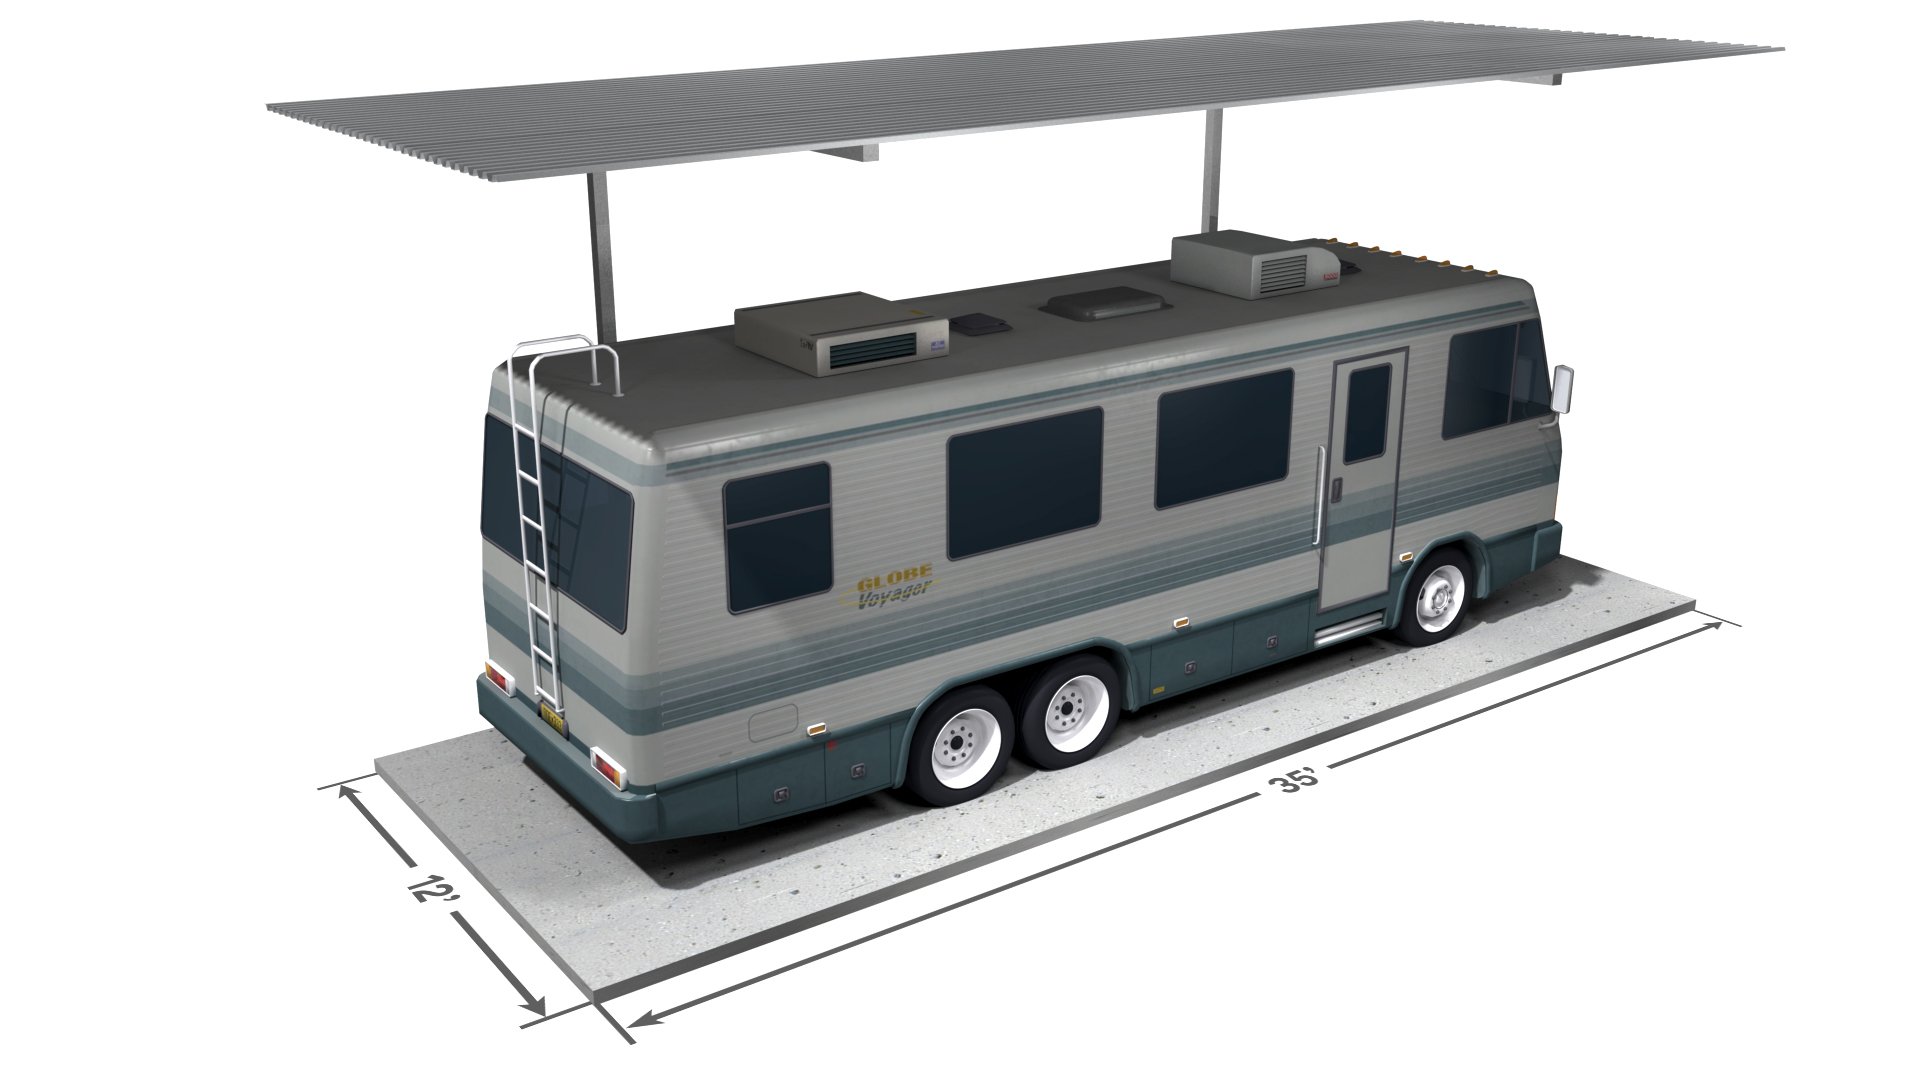 Covered Parking Space for RV and Boat.